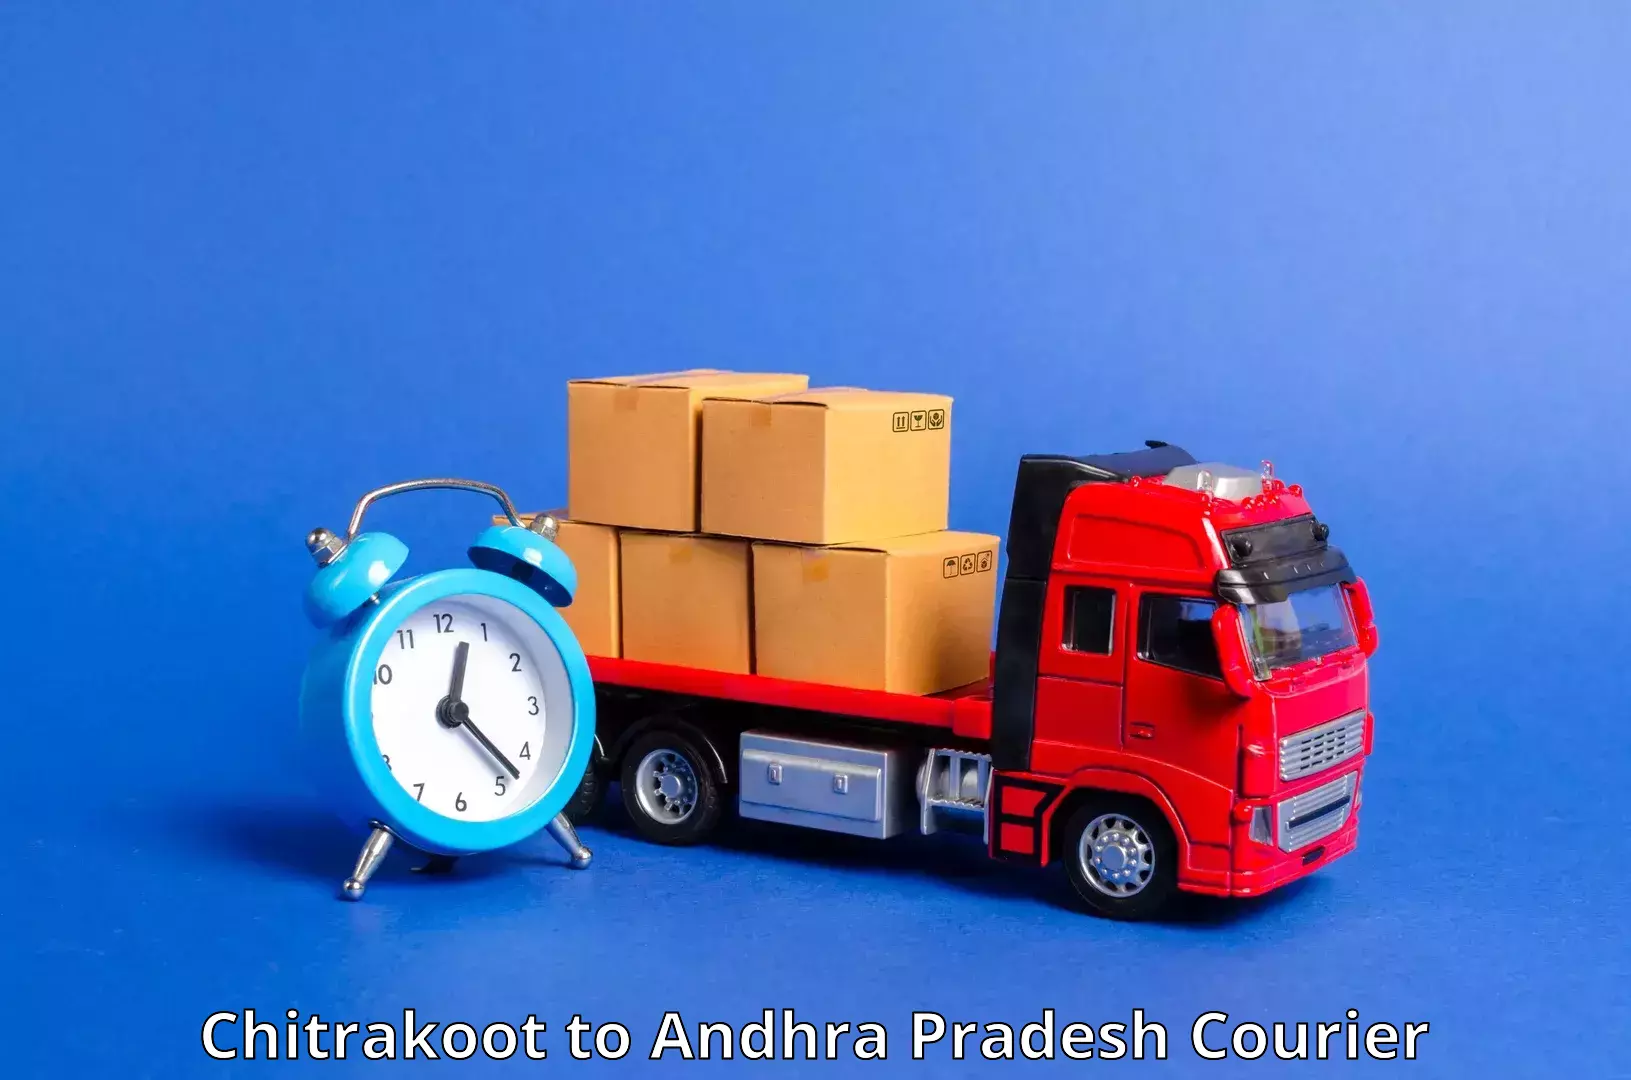 Express delivery network Chitrakoot to Puttaparthi